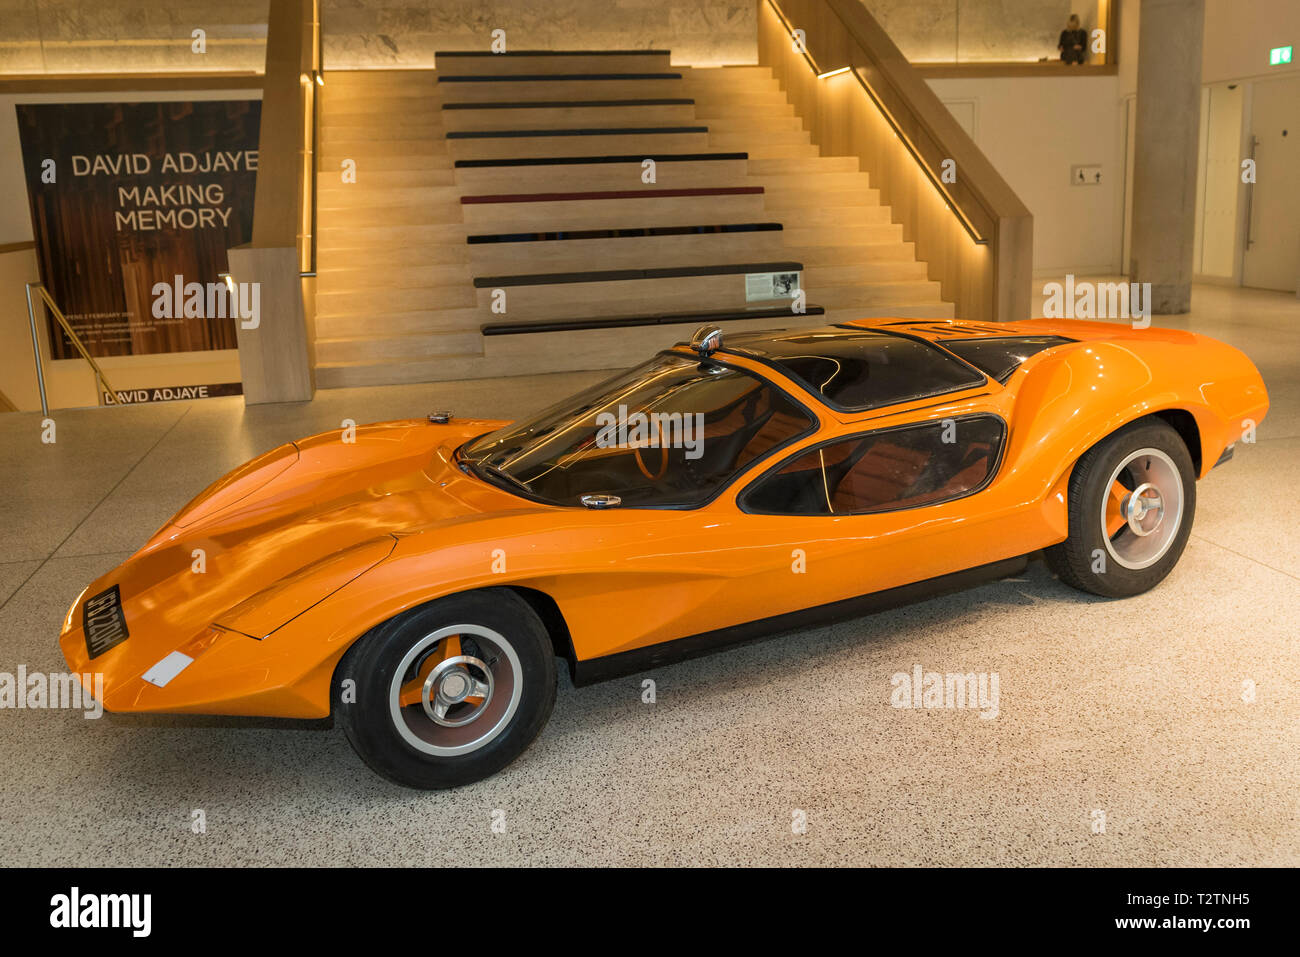 London, UK.  4 April 2019. A Probe 16 car presented at a photocall at the Design Museum in Kensington.  The car features prominently in Stanley Kubrick's film 'A Clockwork Orange' (1971).  Built in 1969 by designers Dennis and Peter Adams, the car is one of only three ever made.  The car is on display as part of 'Stanley Kubrick: The Exhibition', 26 April to 15 September 2019.  Credit: Stephen Chung / Alamy Live News Stock Photo